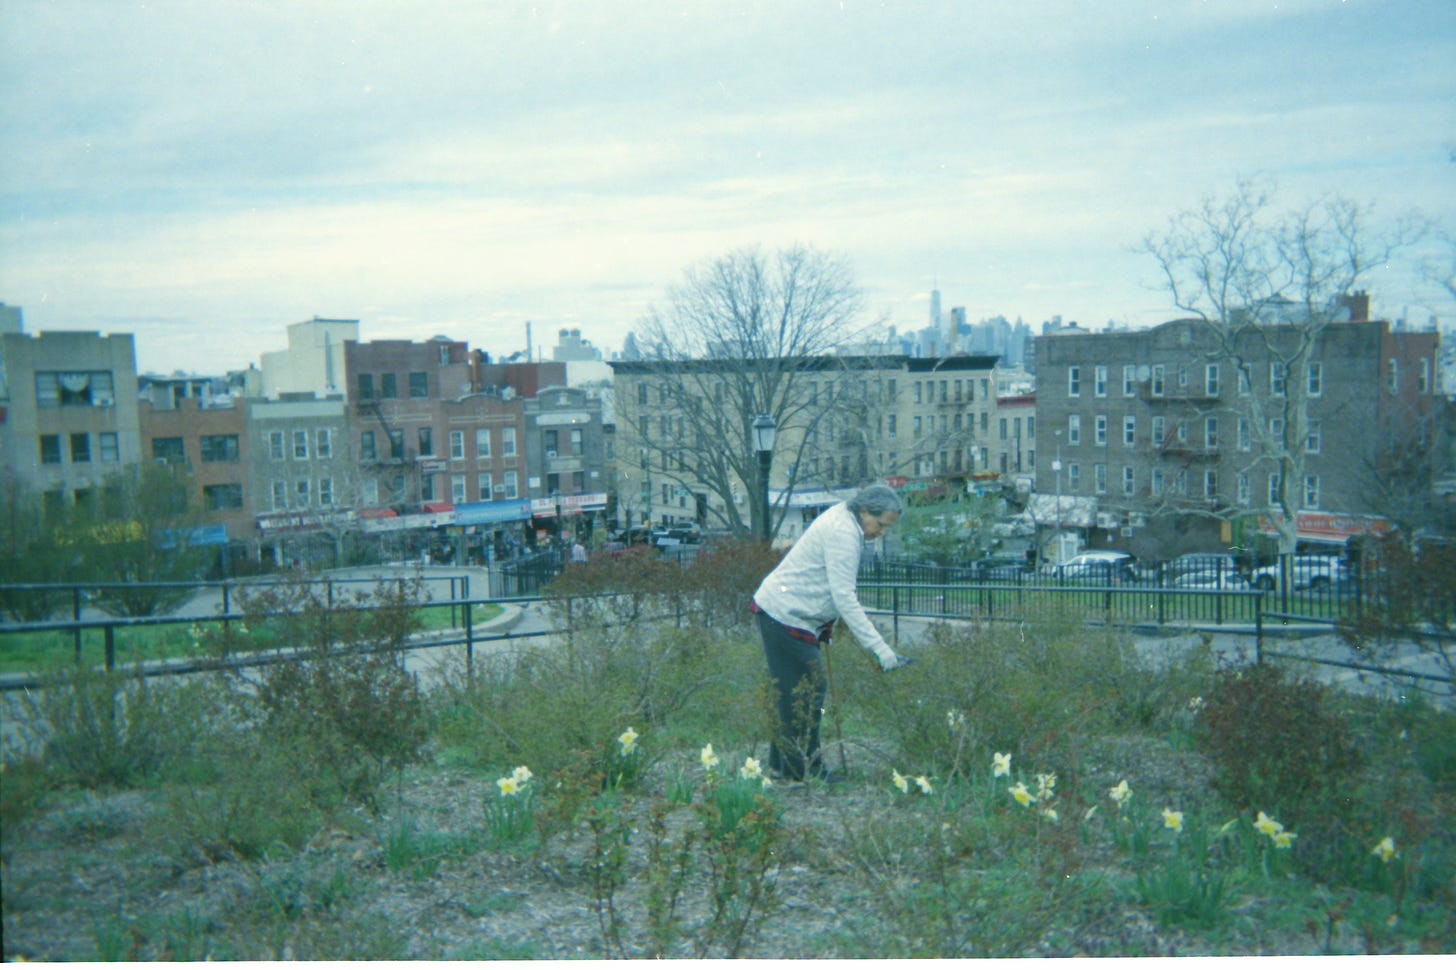 Sunset Park and the lady who tends to the 9/11 memorial garden